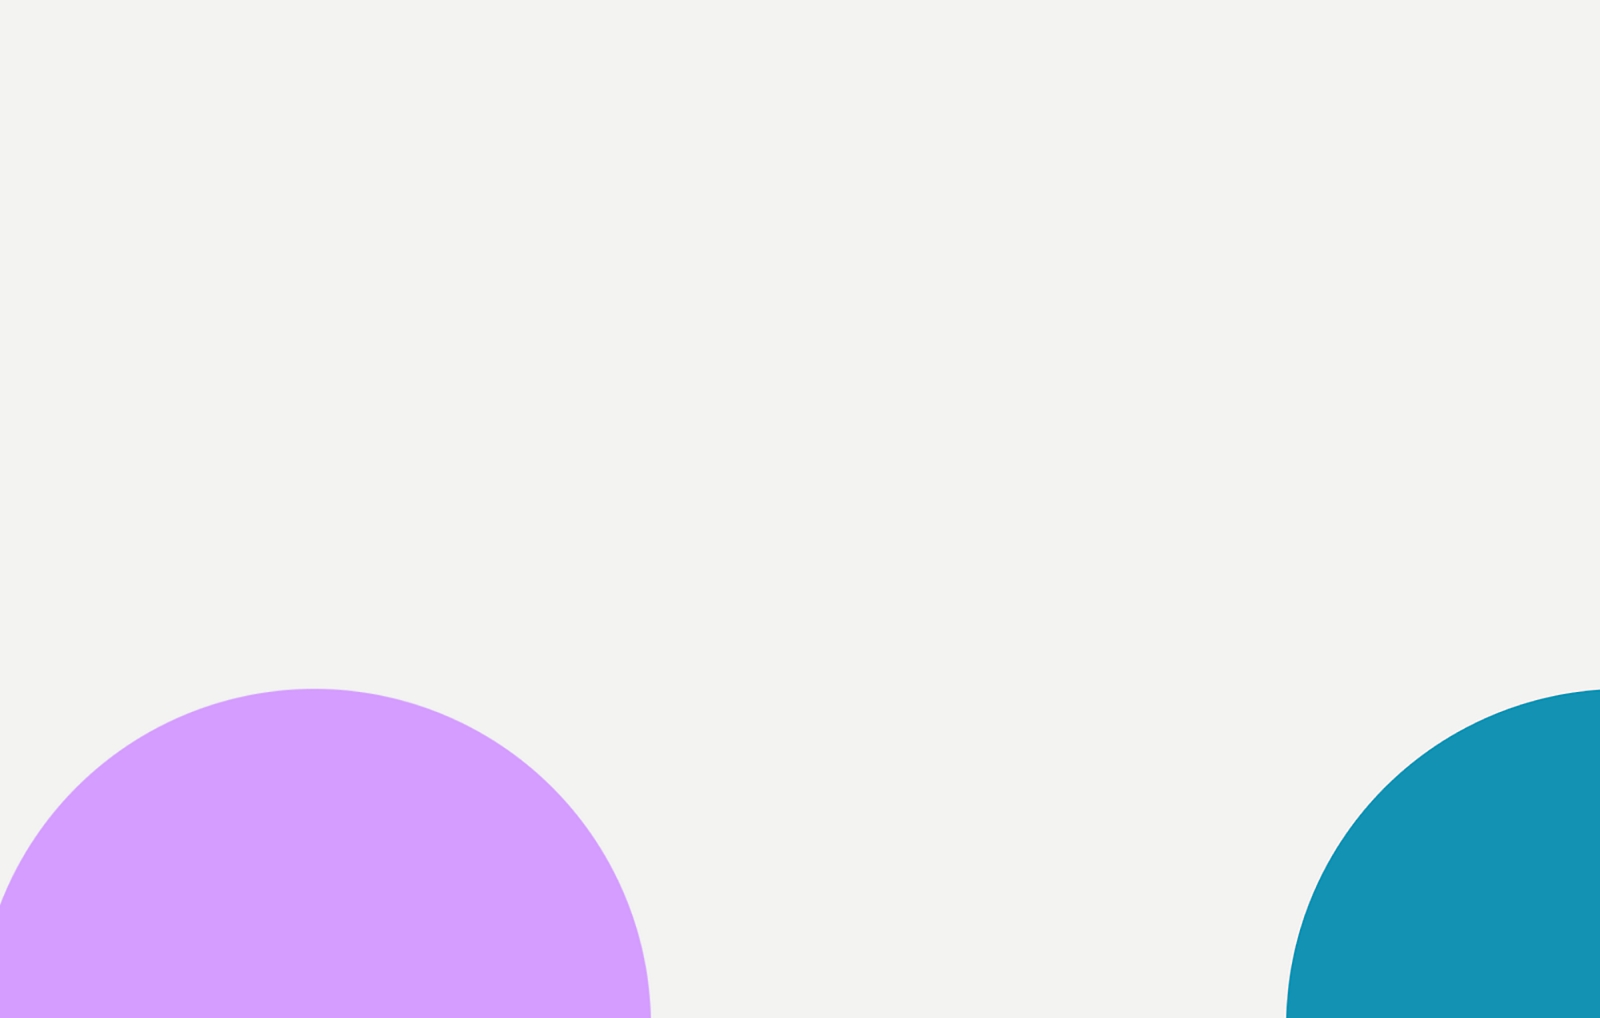 A purple and blue circles on white background